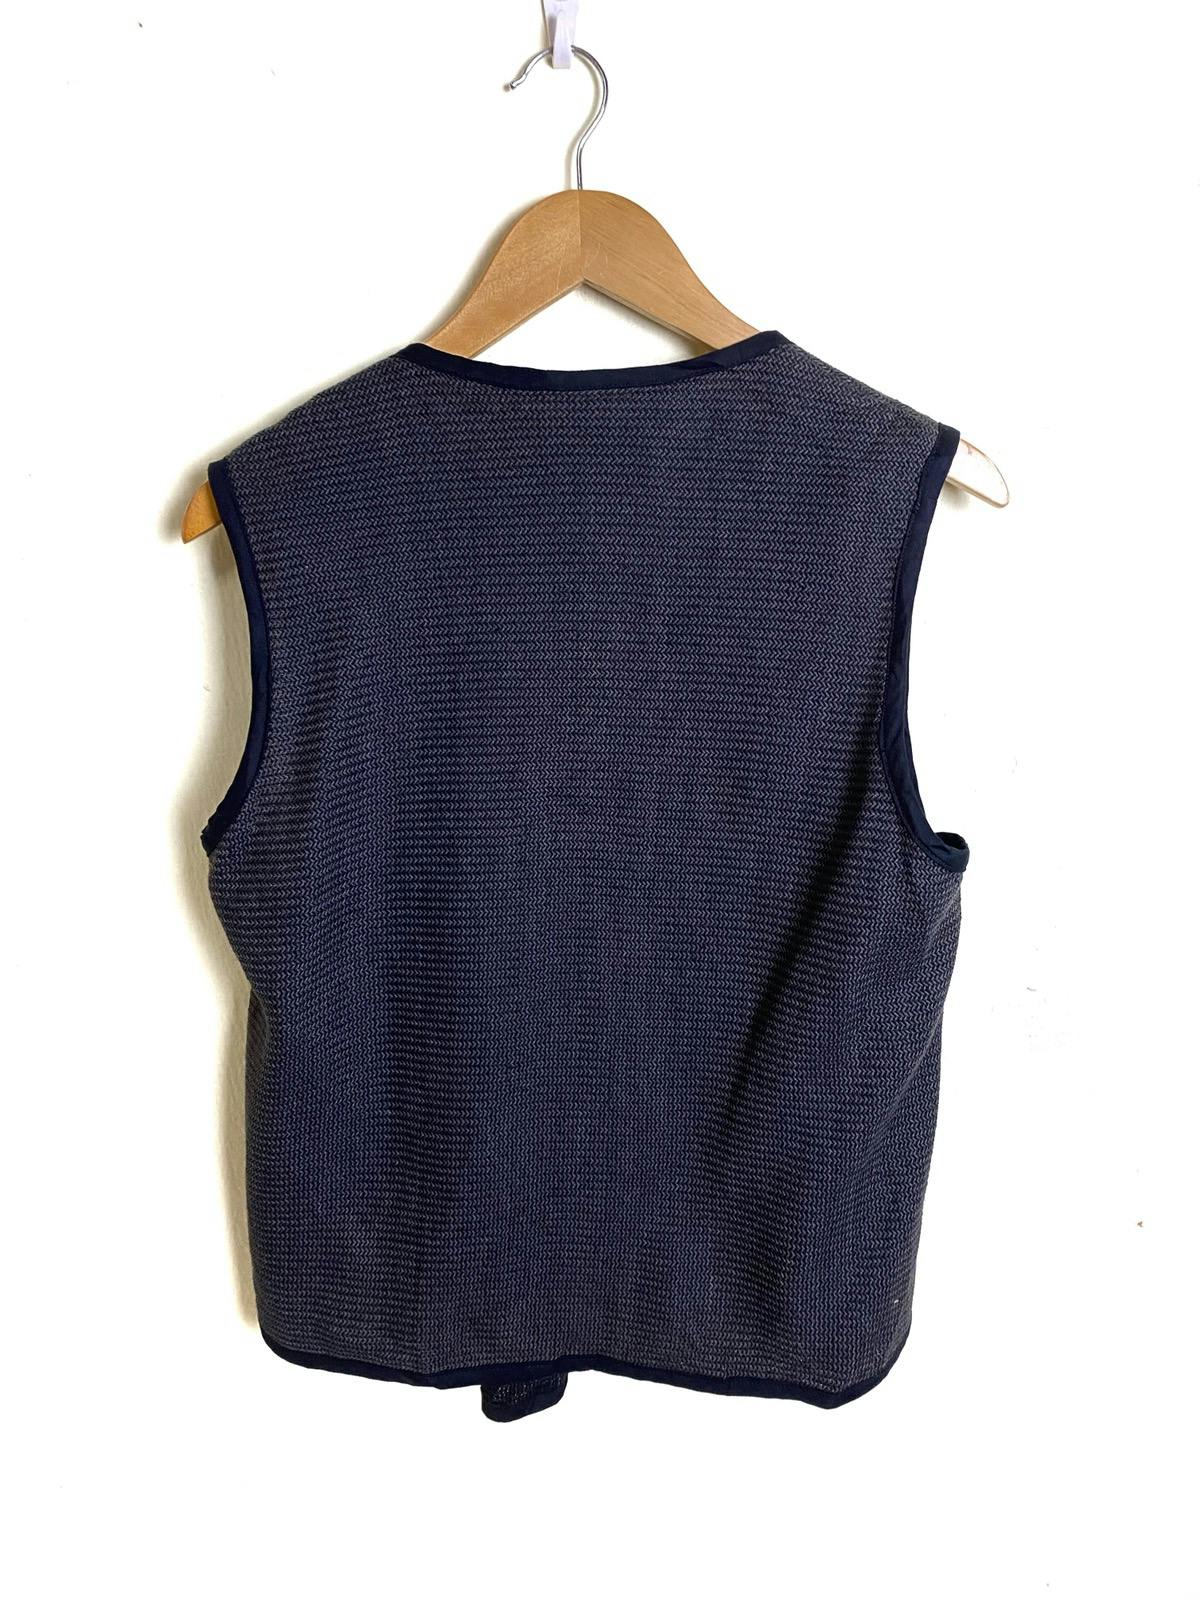 Rare🔥N. Hoolywood Vest Made in Japan - 5